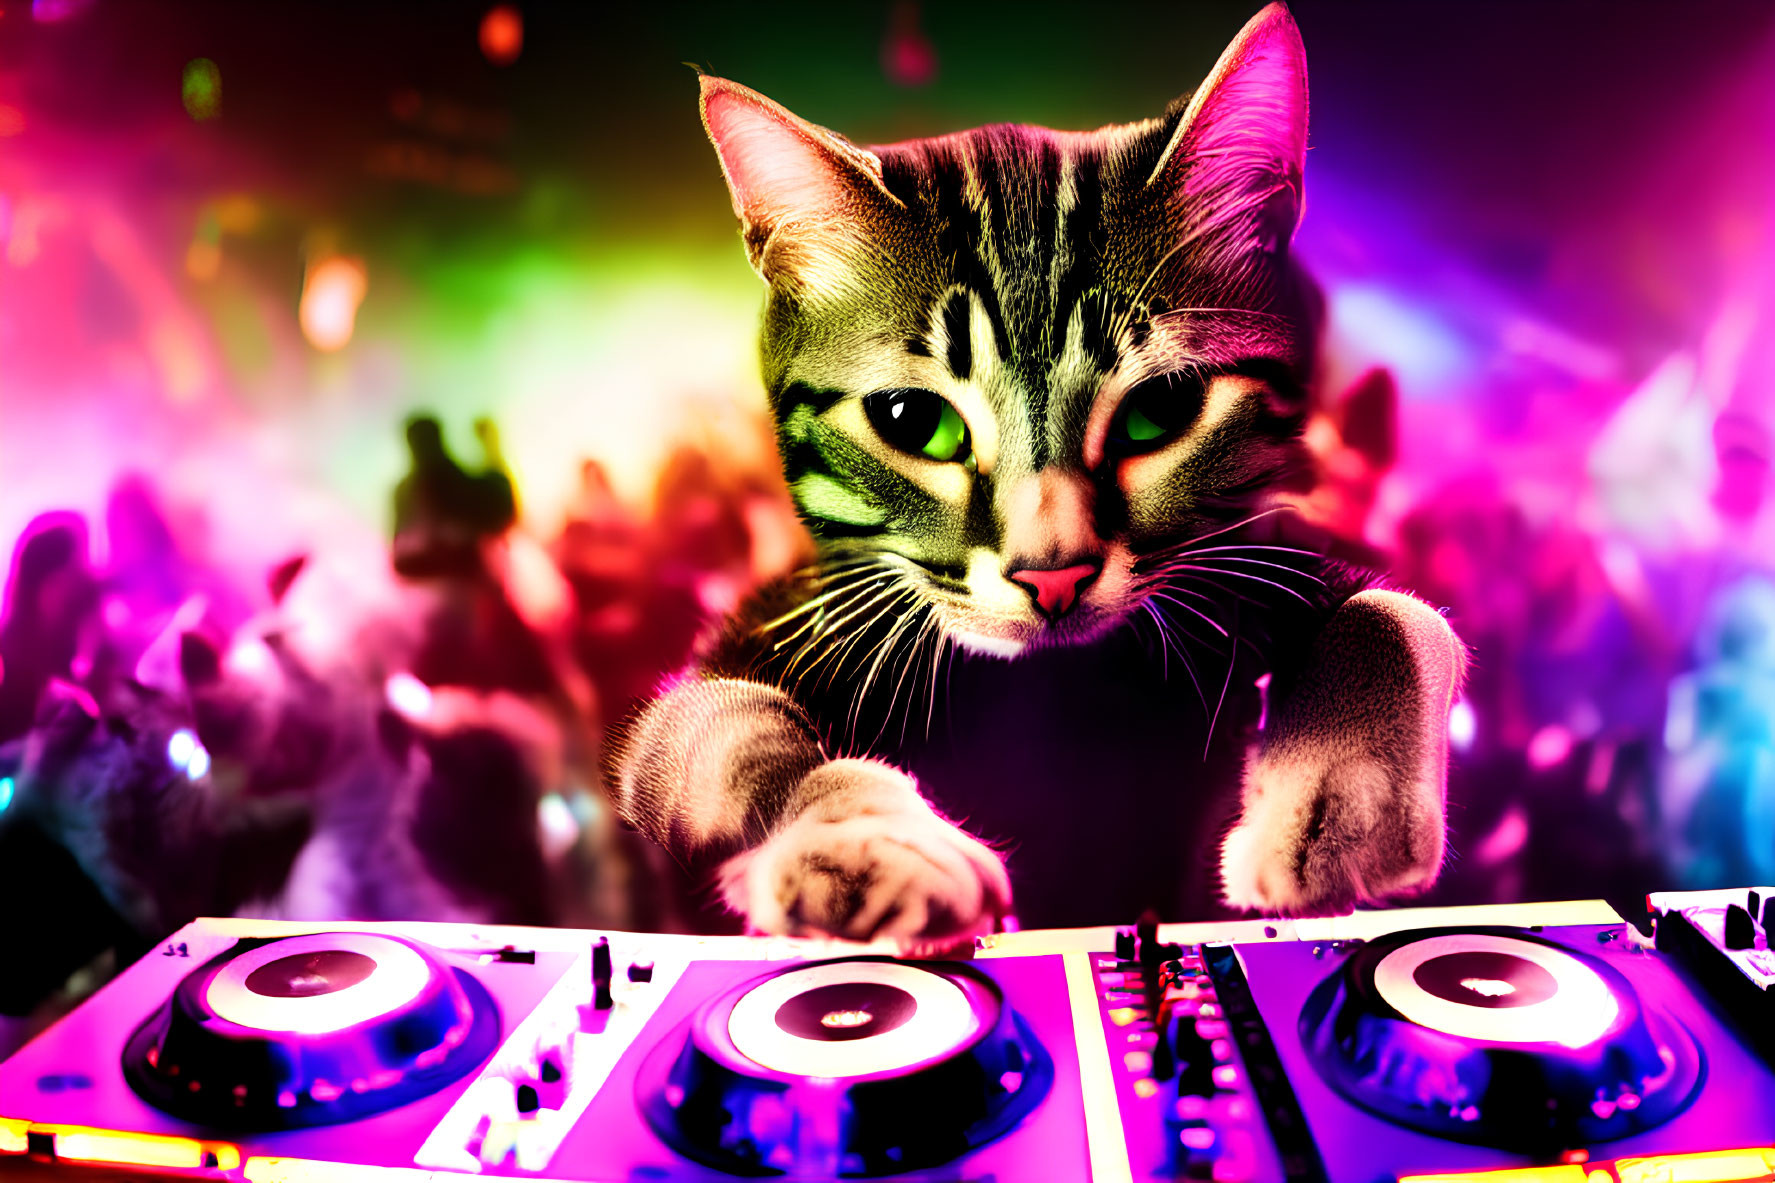 Cat DJing at a colorful party with crowd and lights